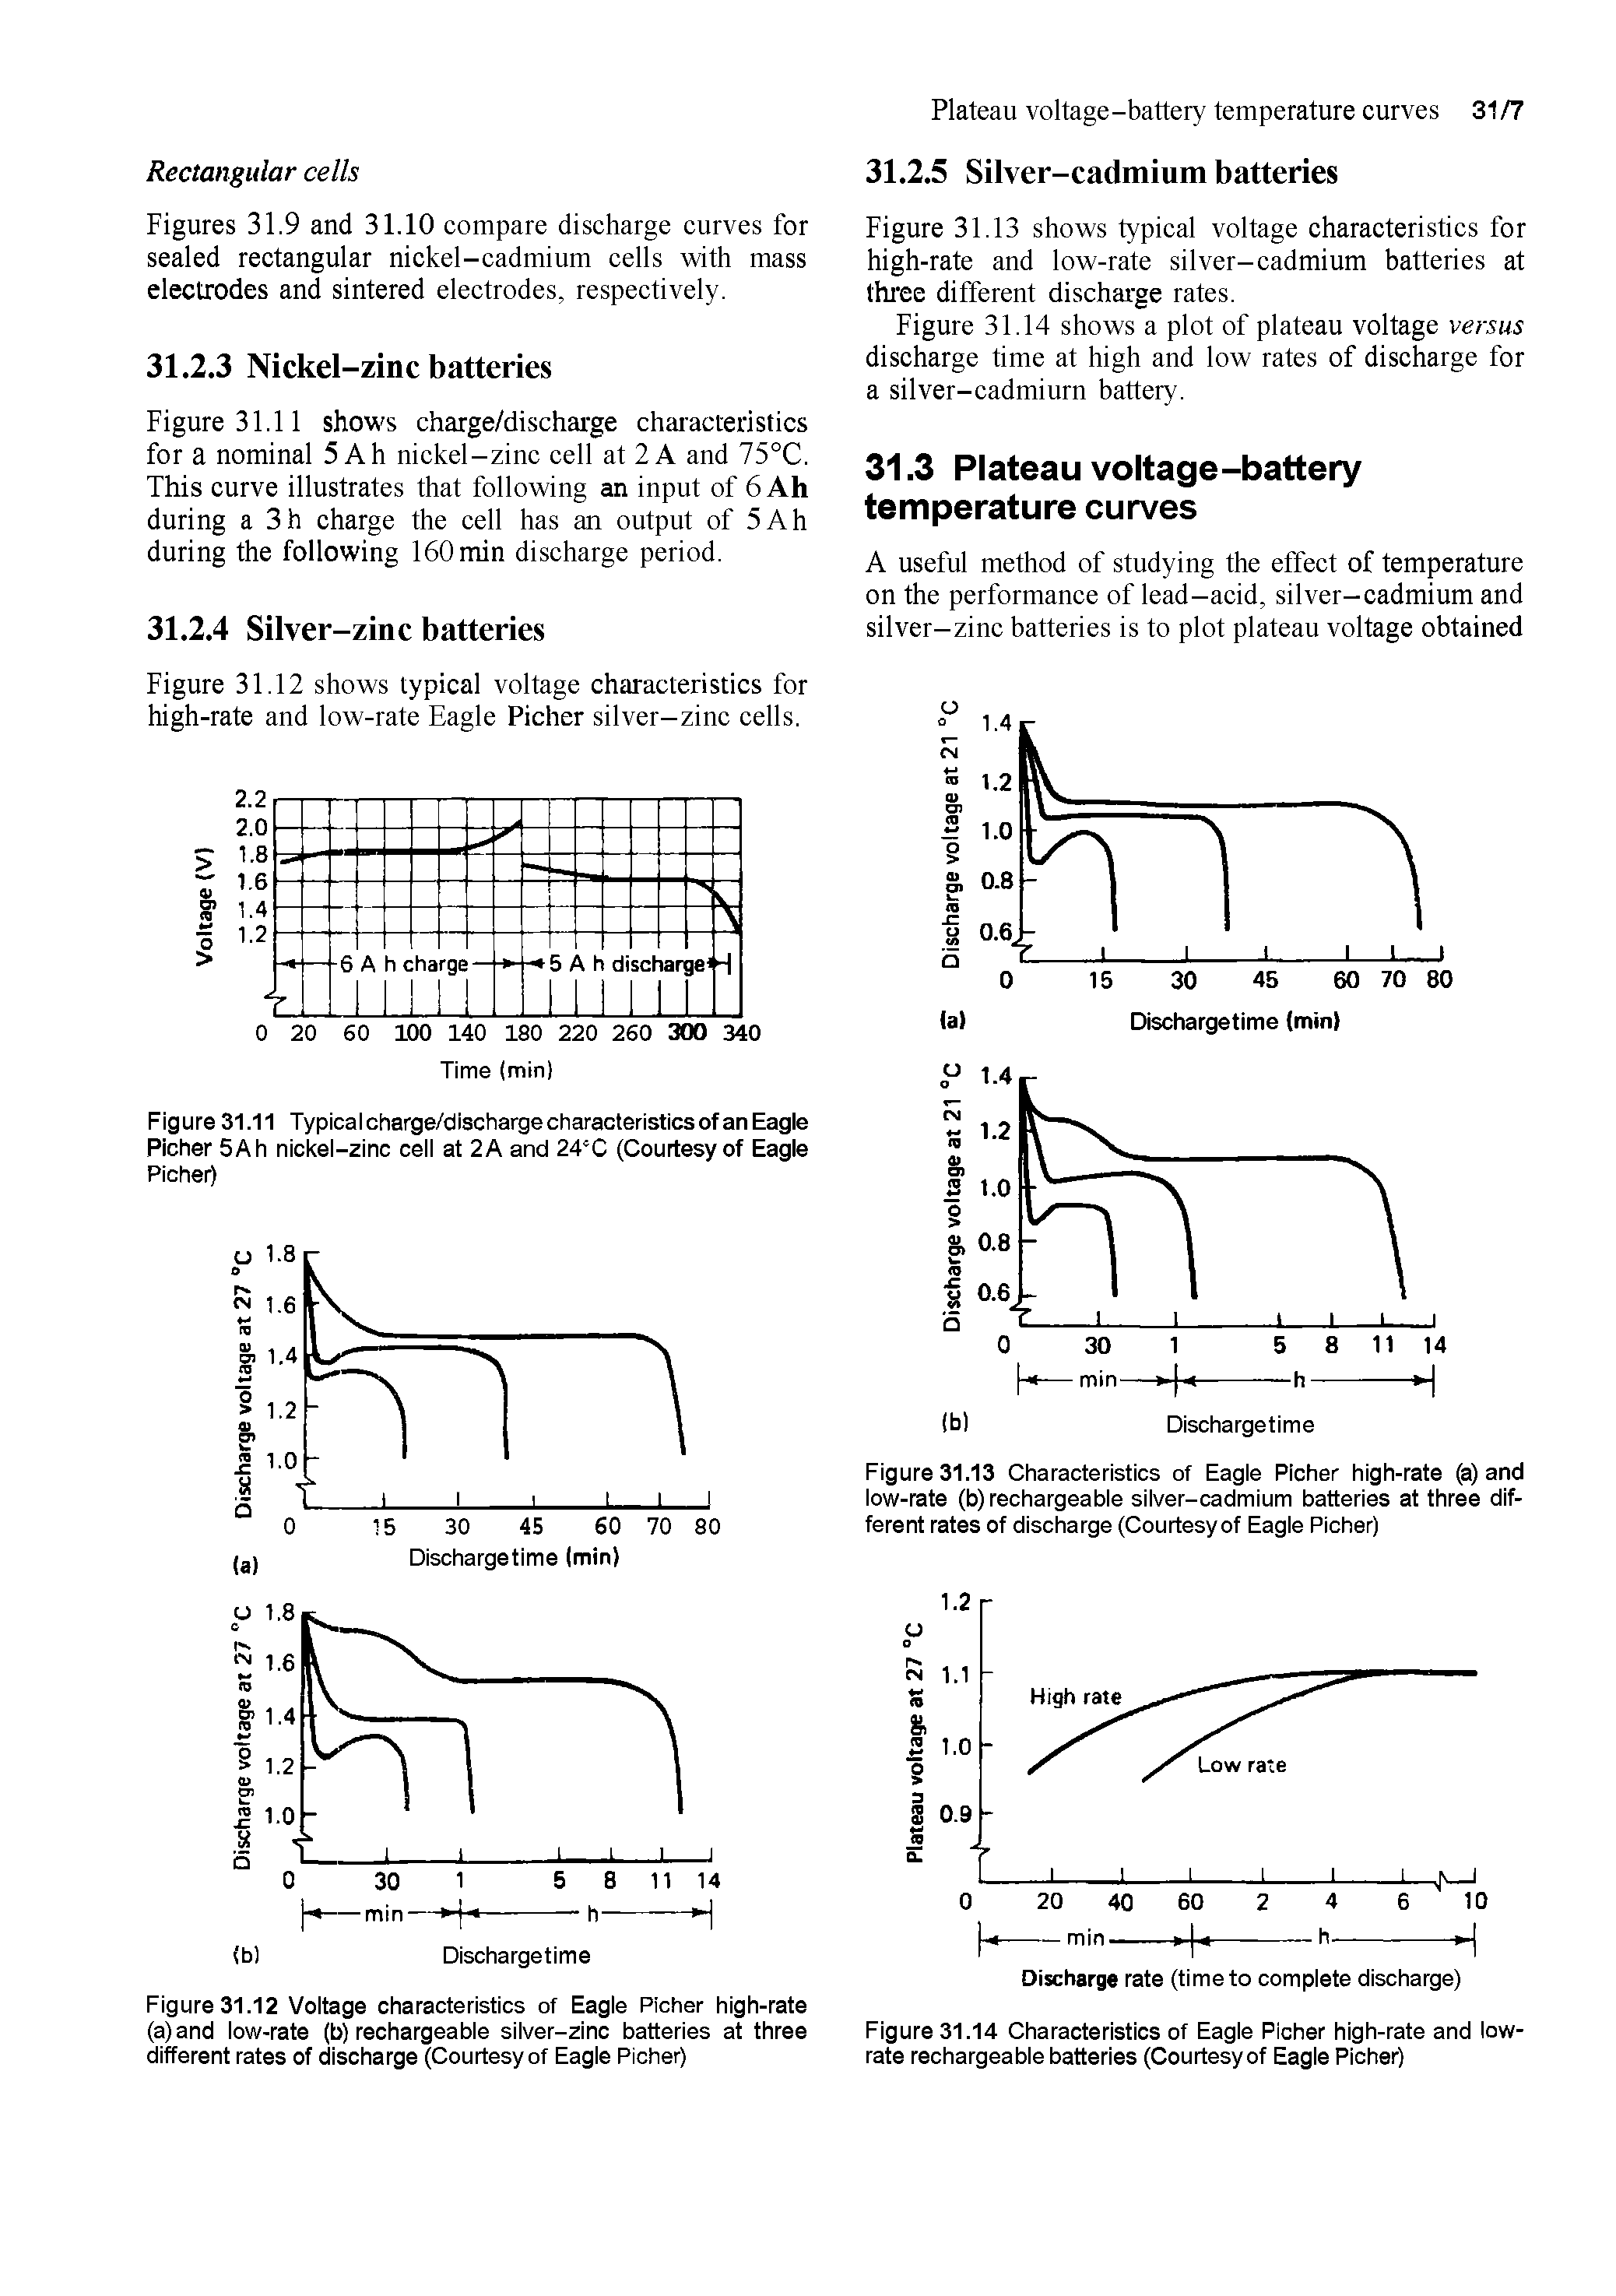 Figure 31.11 Typicaicharge/dischargecharacteristicsofanEagle Richer 5Ah nickel-zinc cell at 2A and 24 C (Courtesy of Eagle Picher)...